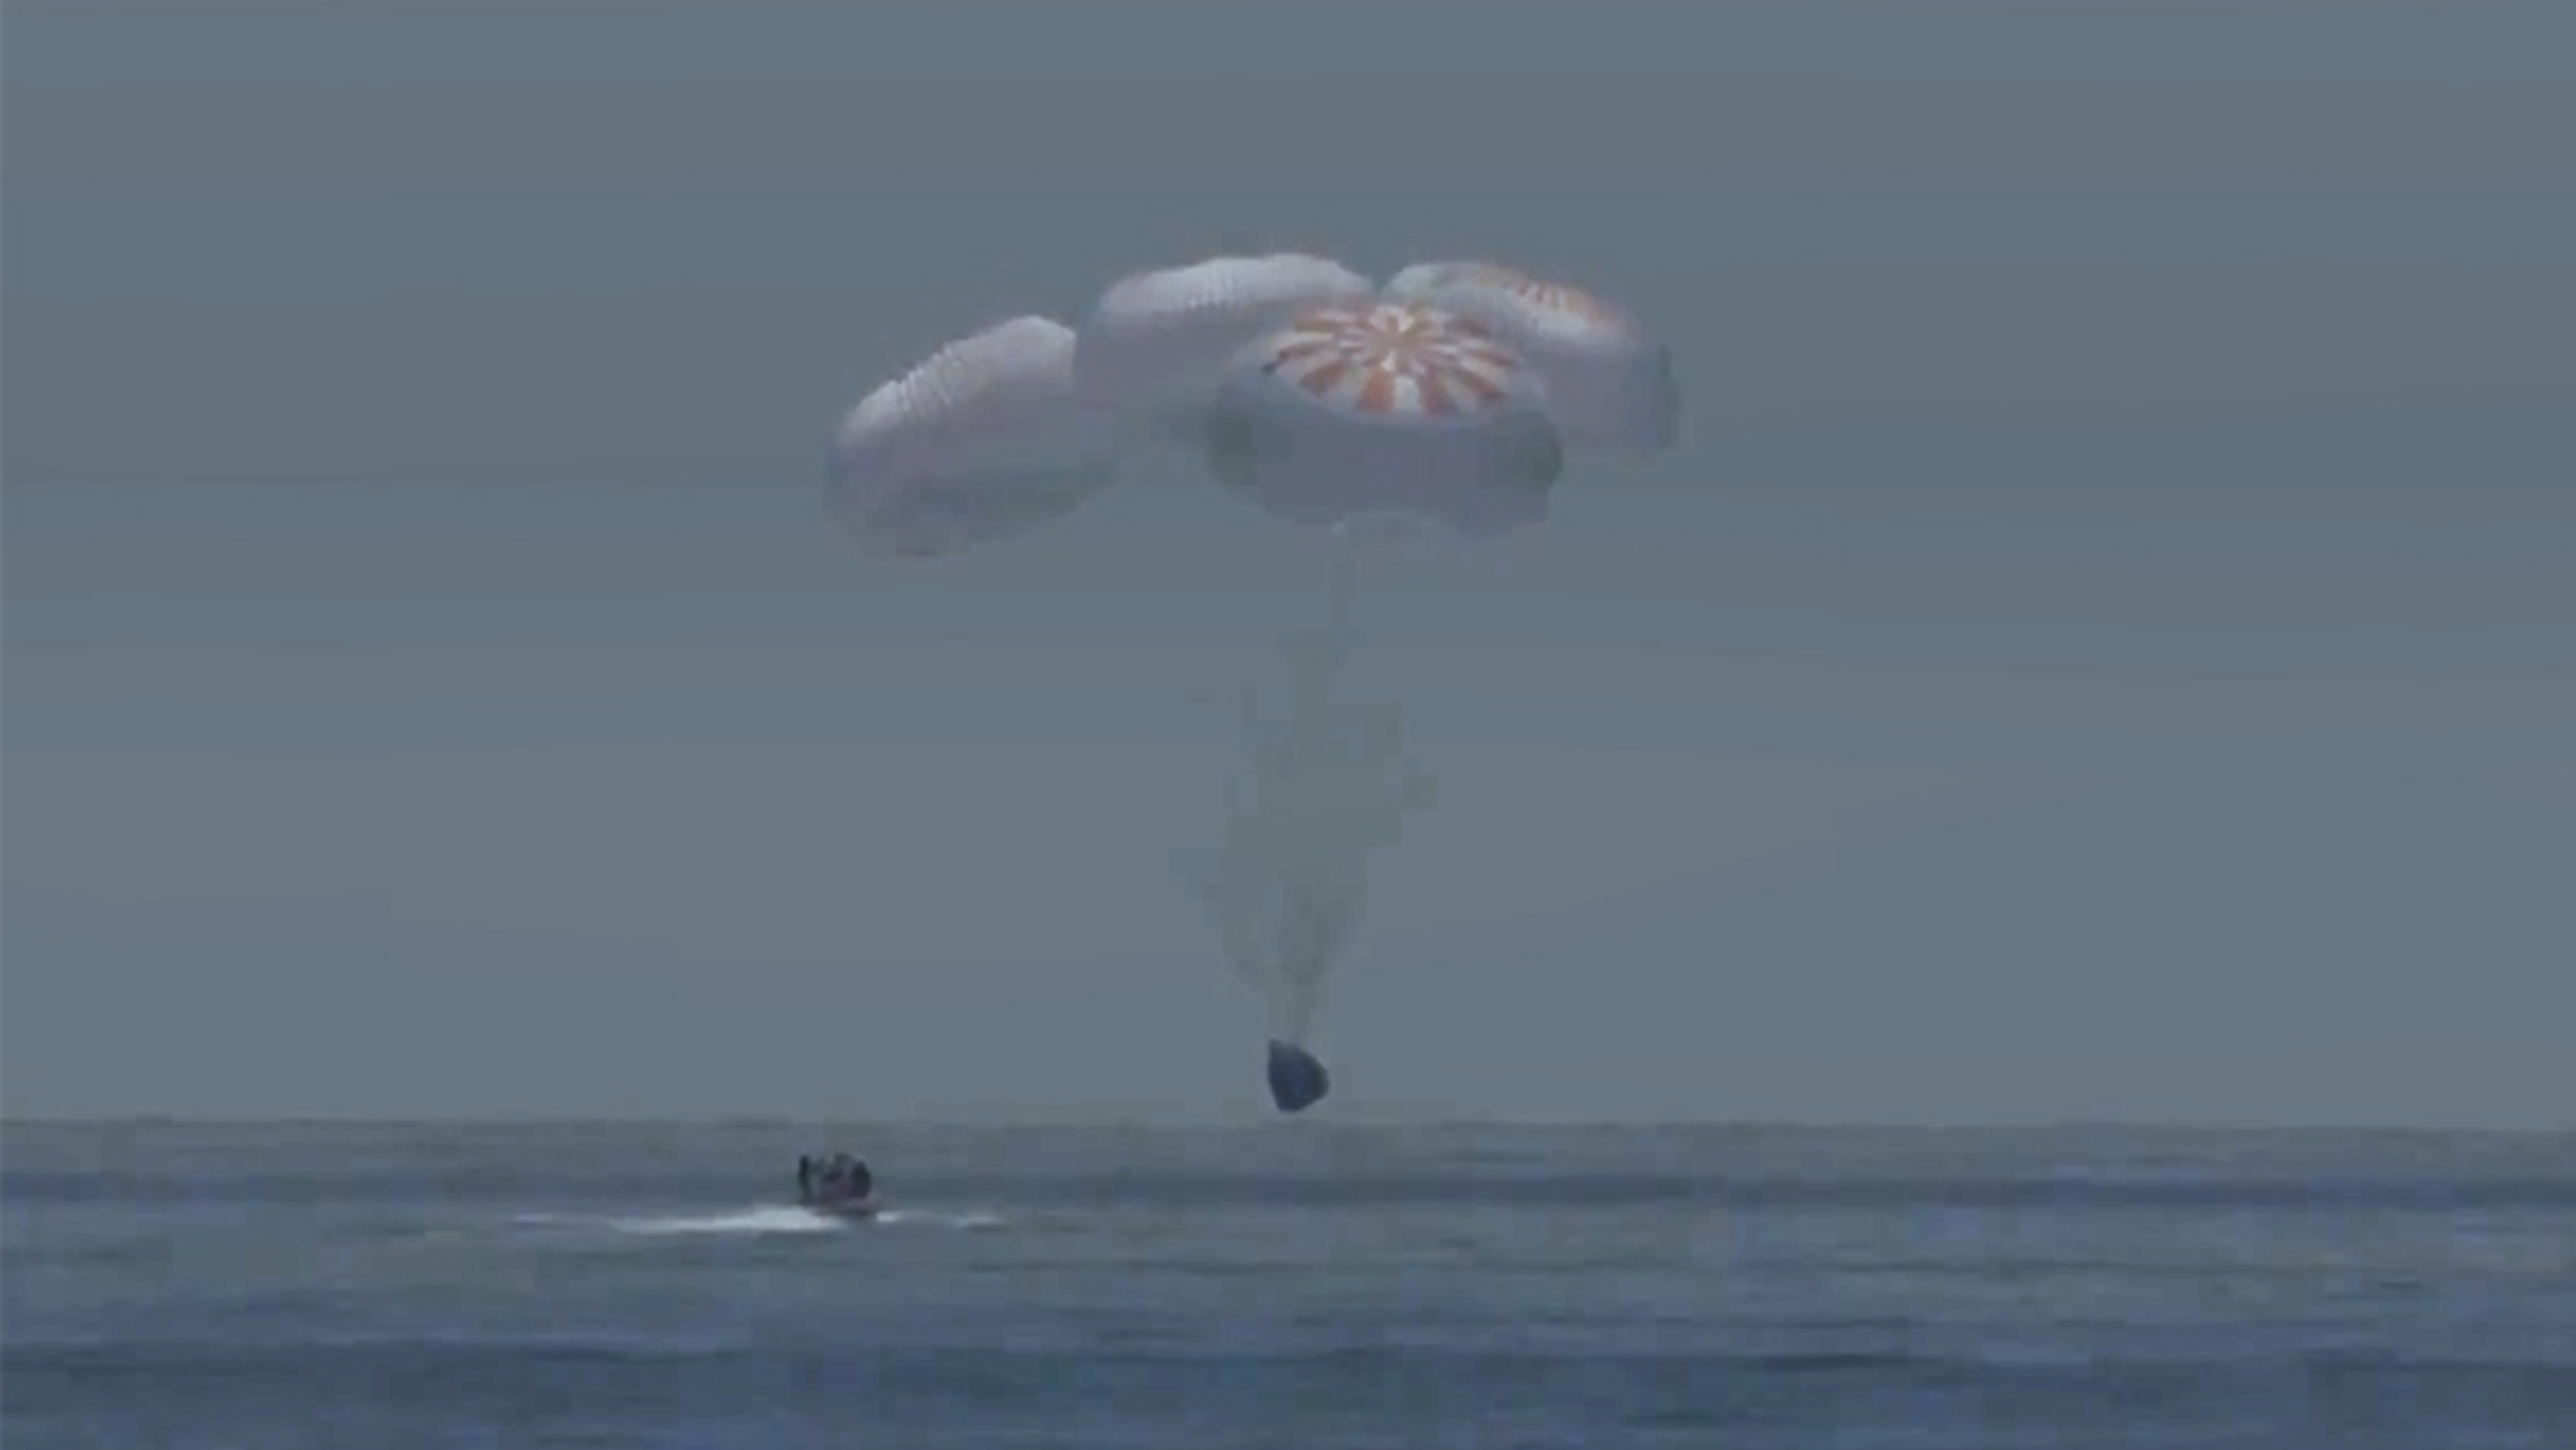 SpaceX's Crew Dragon capsule splashes down in the 